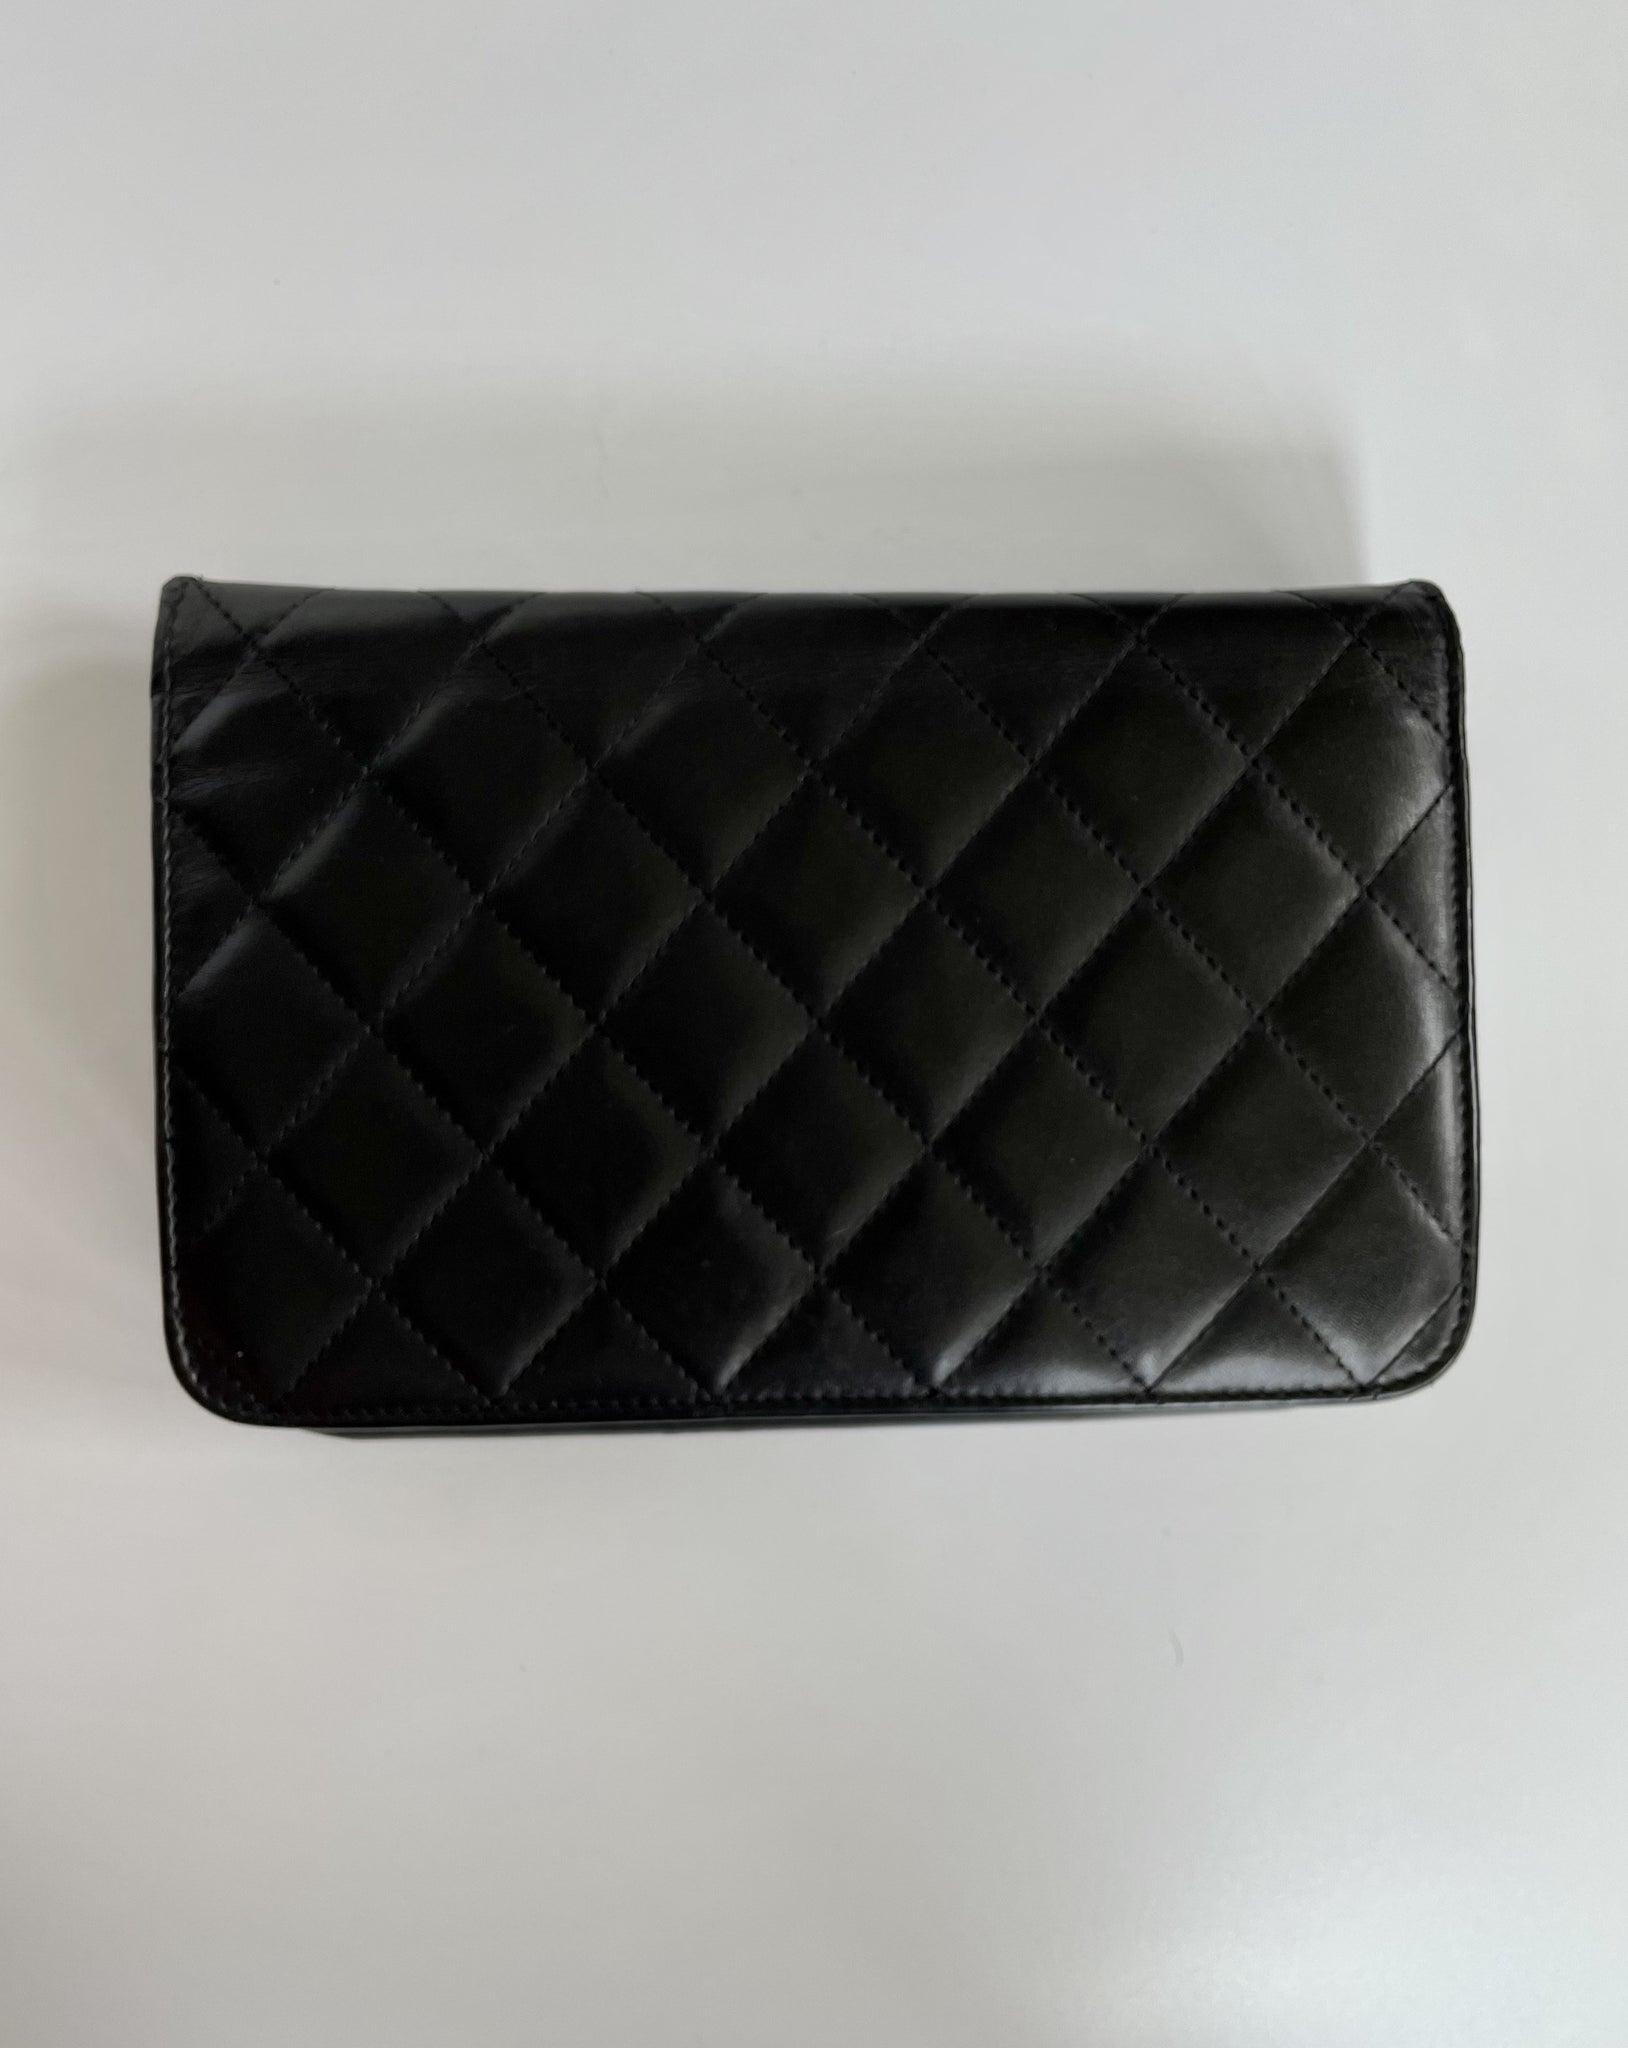 CHANEL / CAMBON WALLET ON CHAIN / BLACK